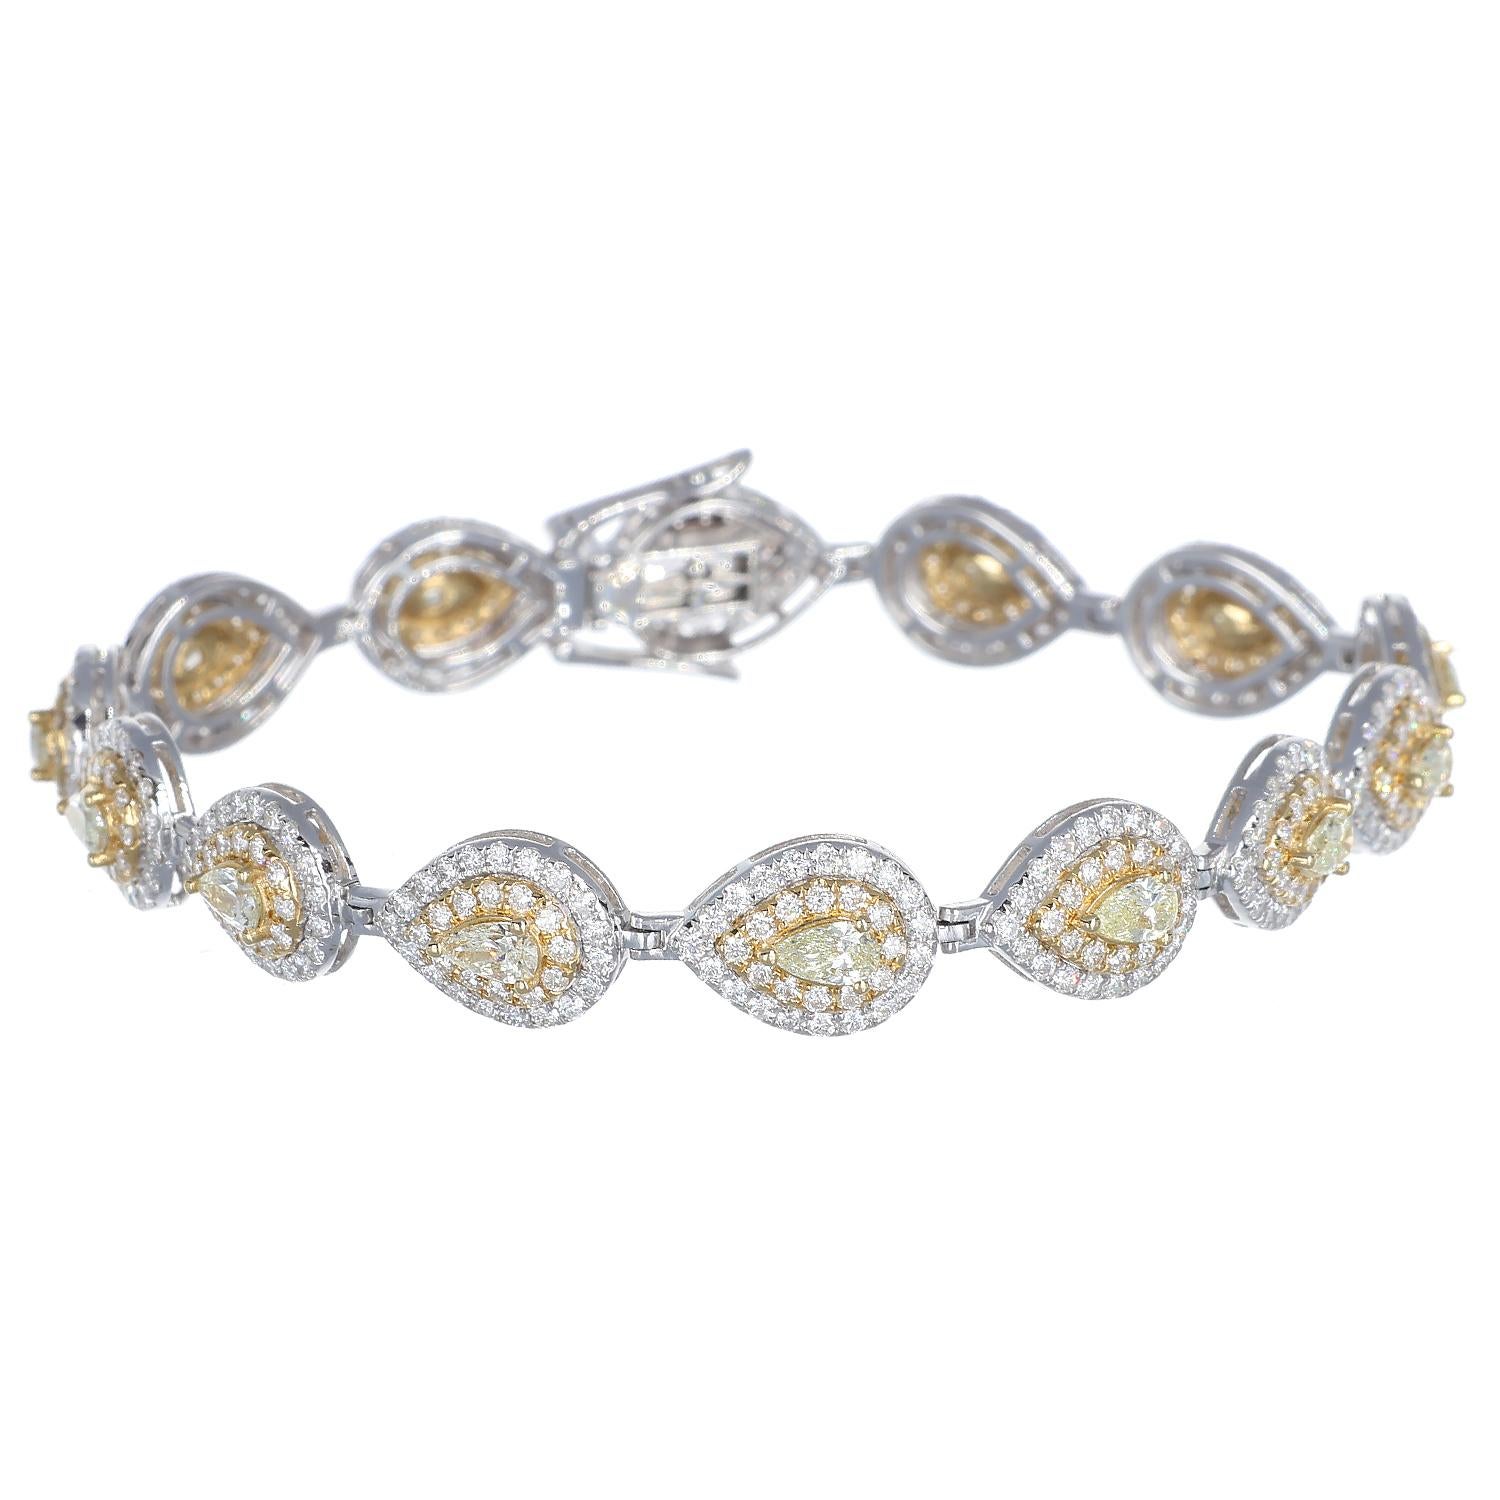 Wrapped in an aura of luxury and opulence, this bracelet epitomizes the essence of fine jewelry craftsmanship. A tribute to timeless elegance, its diamonds dance in the light, capturing gazes and promising to be not just an adornment but a legacy.